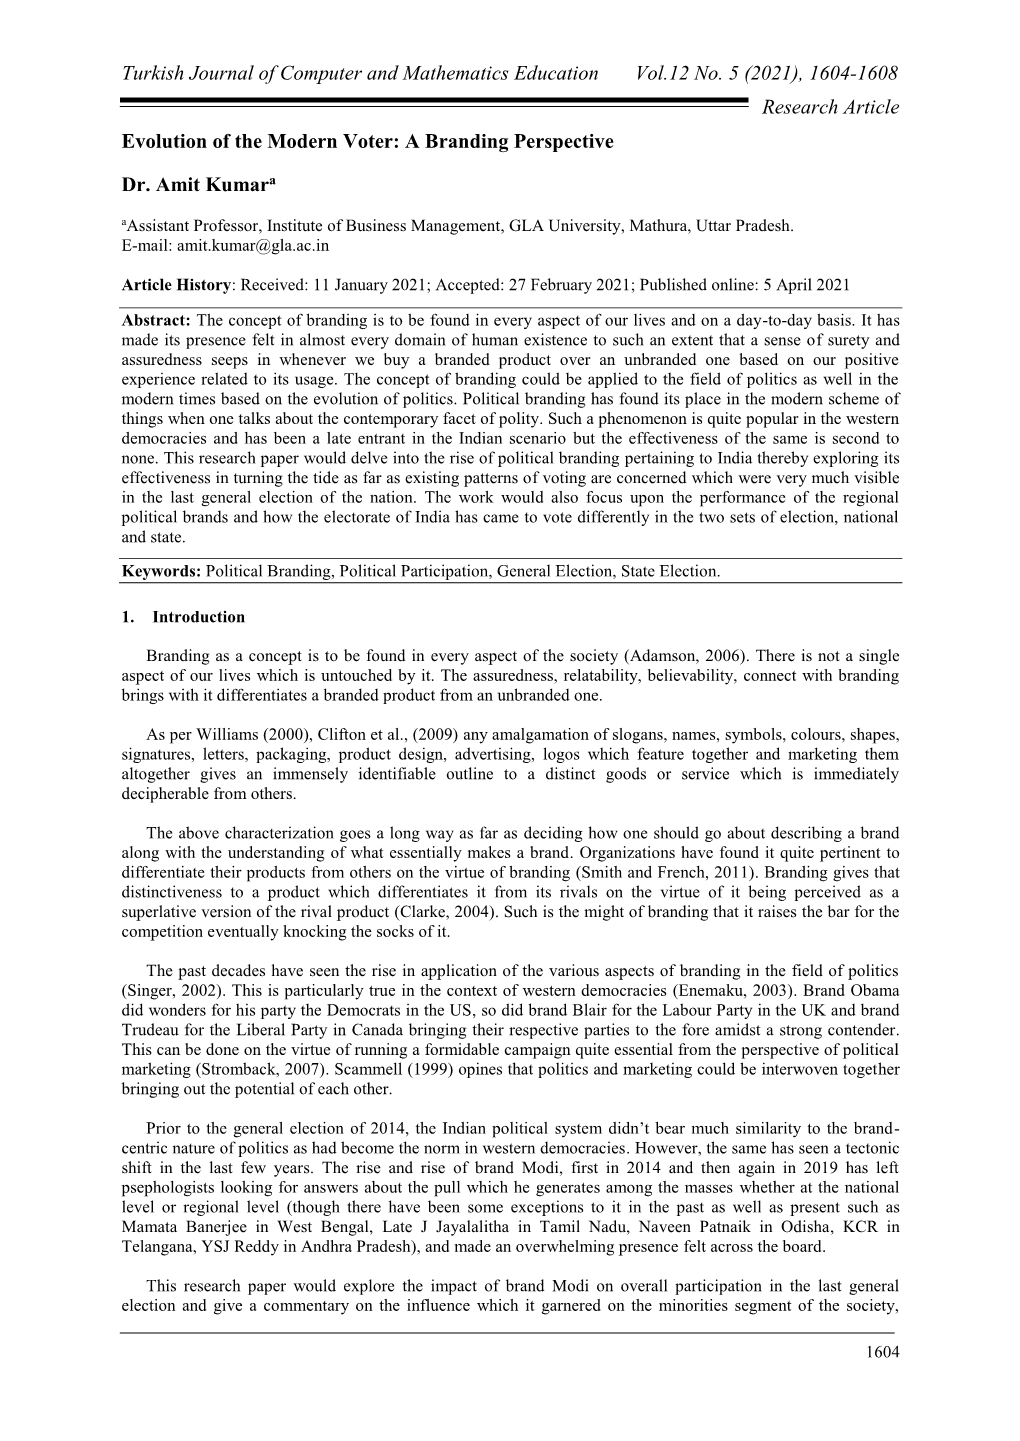 1604-1608 Research Article Evolution of the Modern Voter: a Branding Perspective